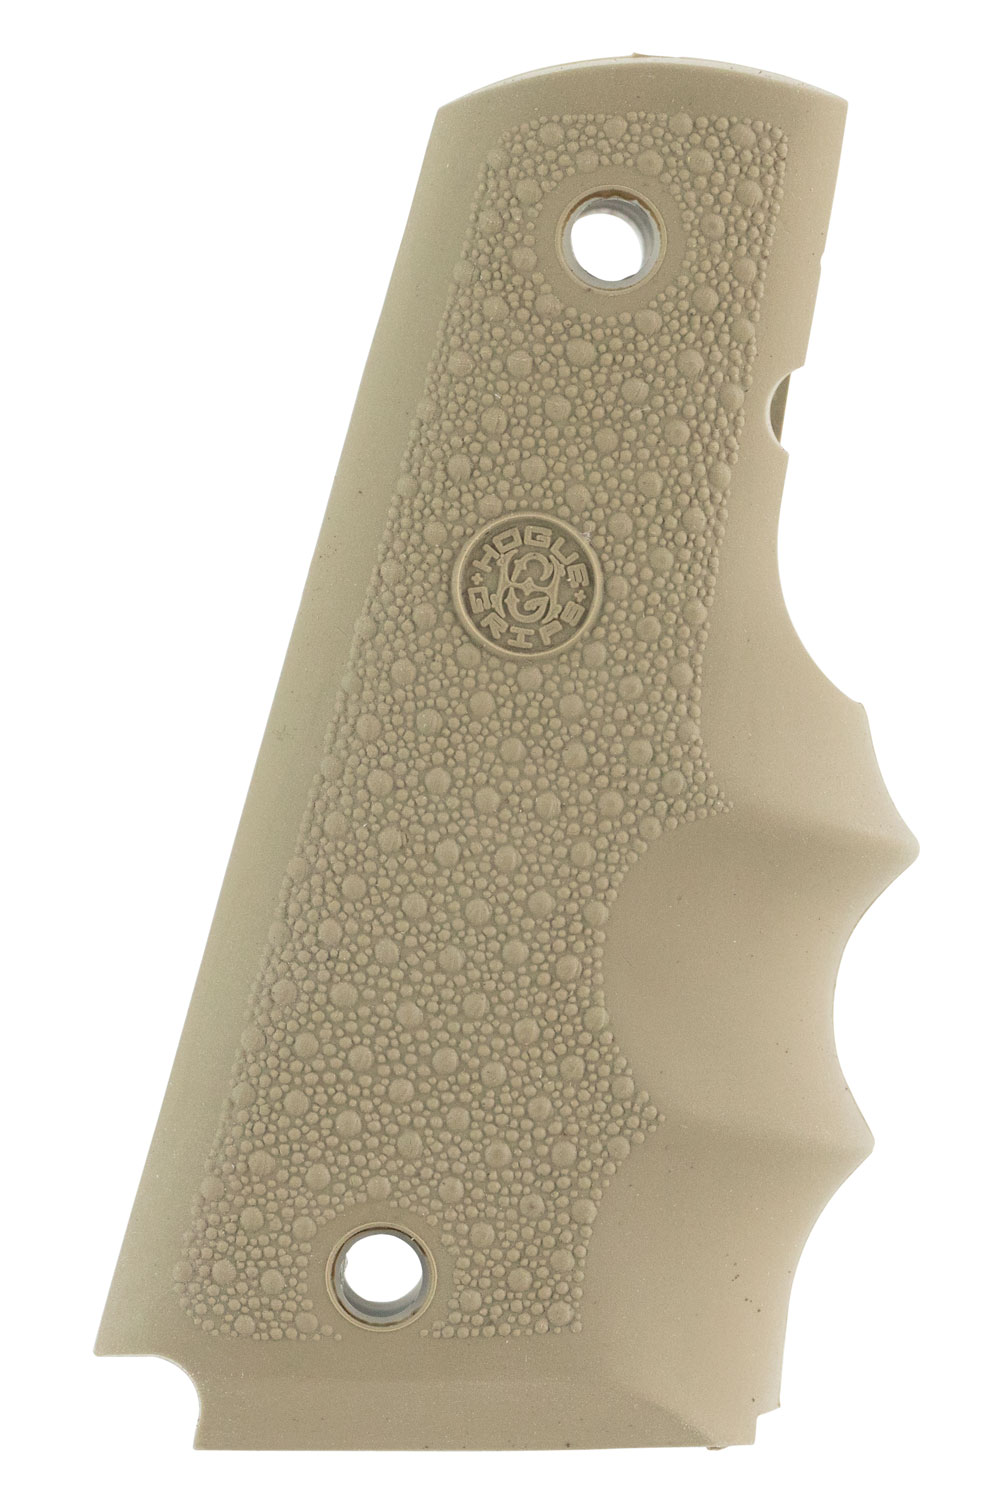 Hogue 45003 OverMolded Grip Cobblestone Desert Tan Rubber with  Finger Grooves for 1911 Governement